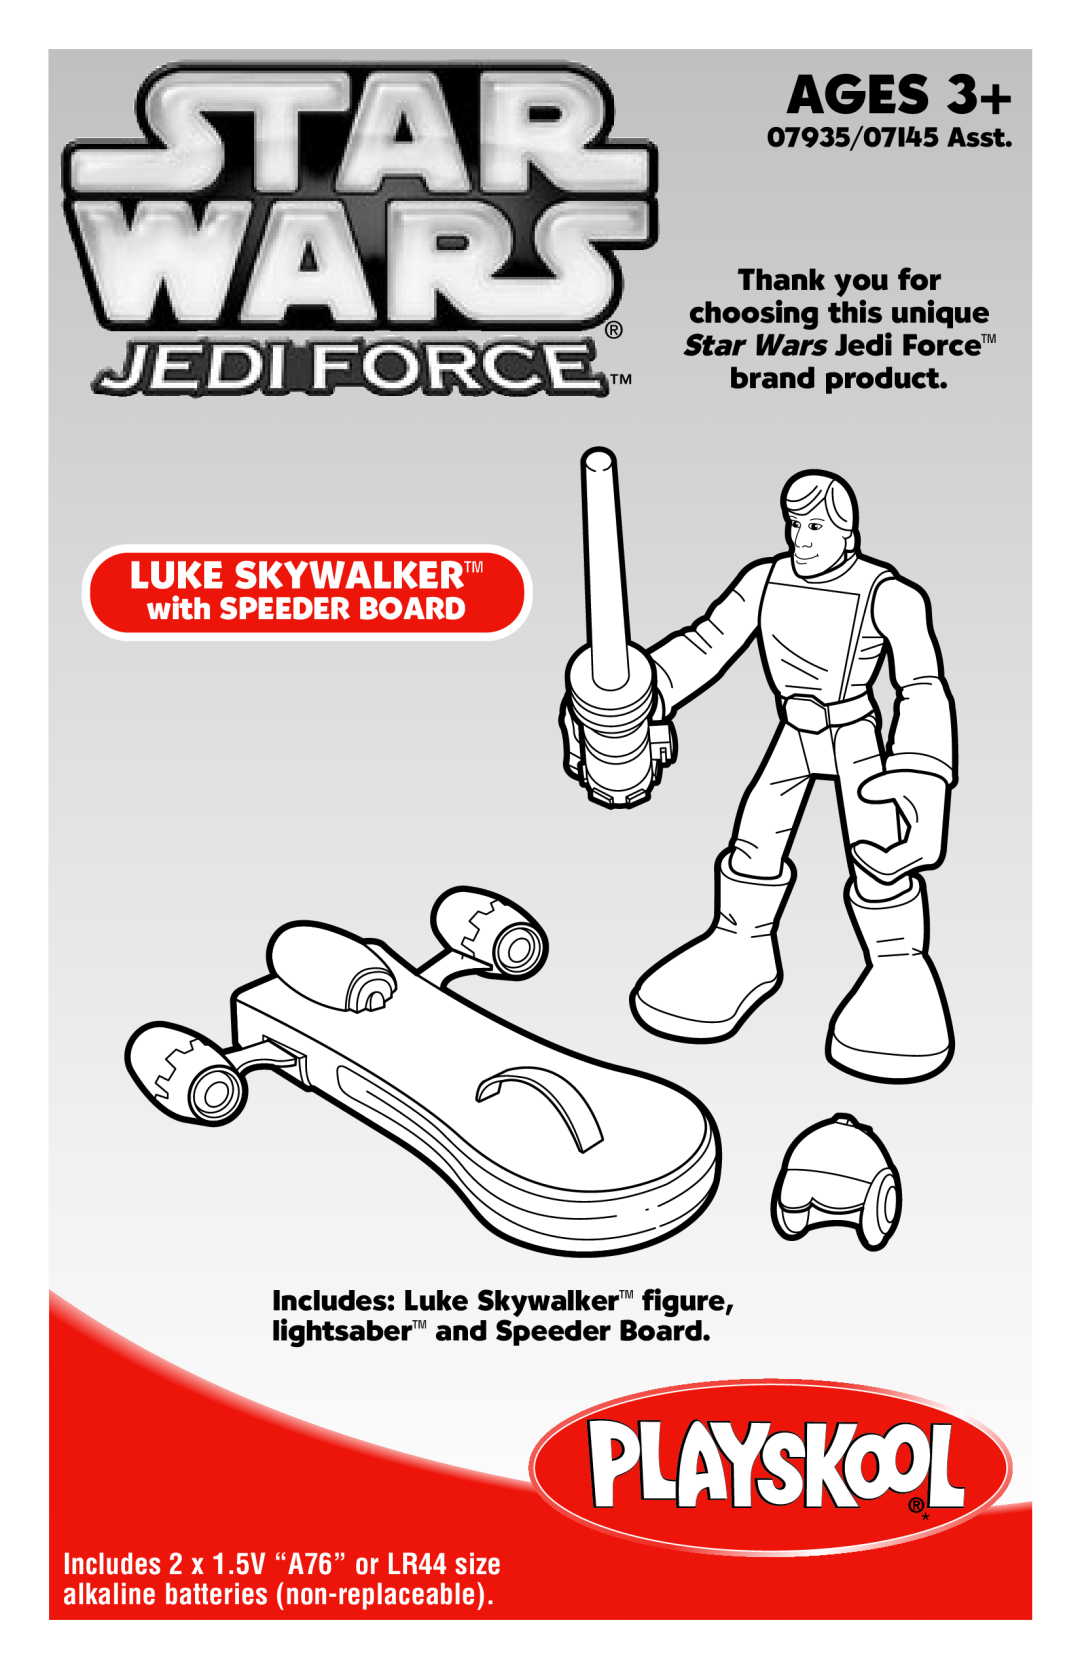 Hasbro manual AGES 3+, Luke Skywalker, Thank you for, brand product, with SPEEDER BOARD, 07935/07145 Asst 